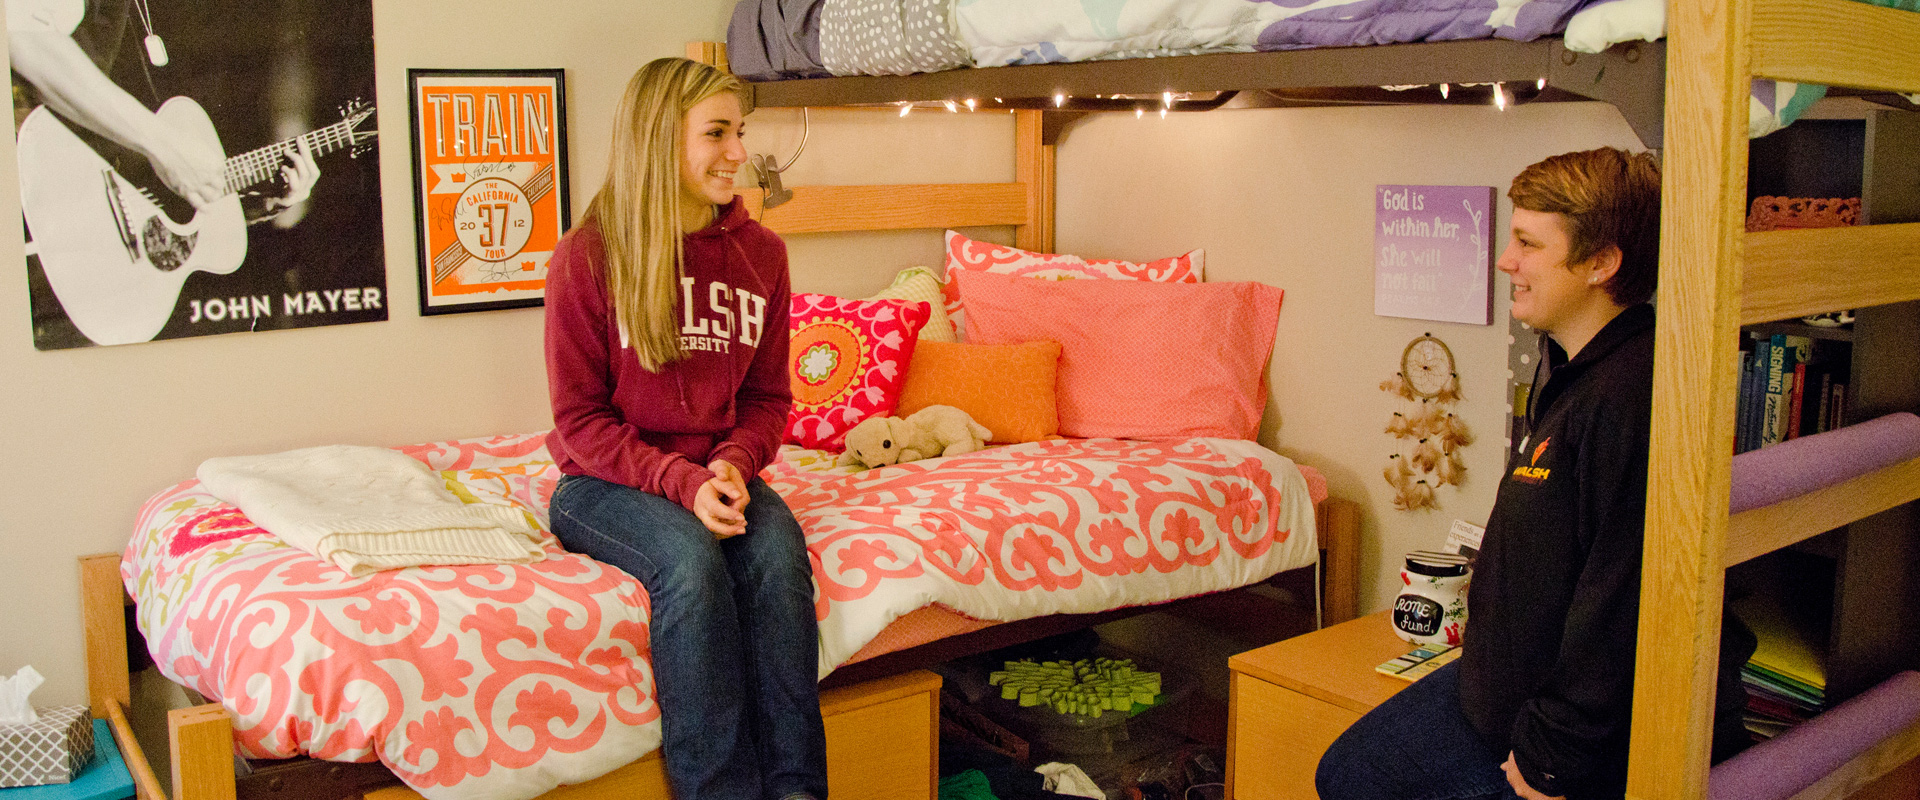 photo of two students conversing in a dorm room